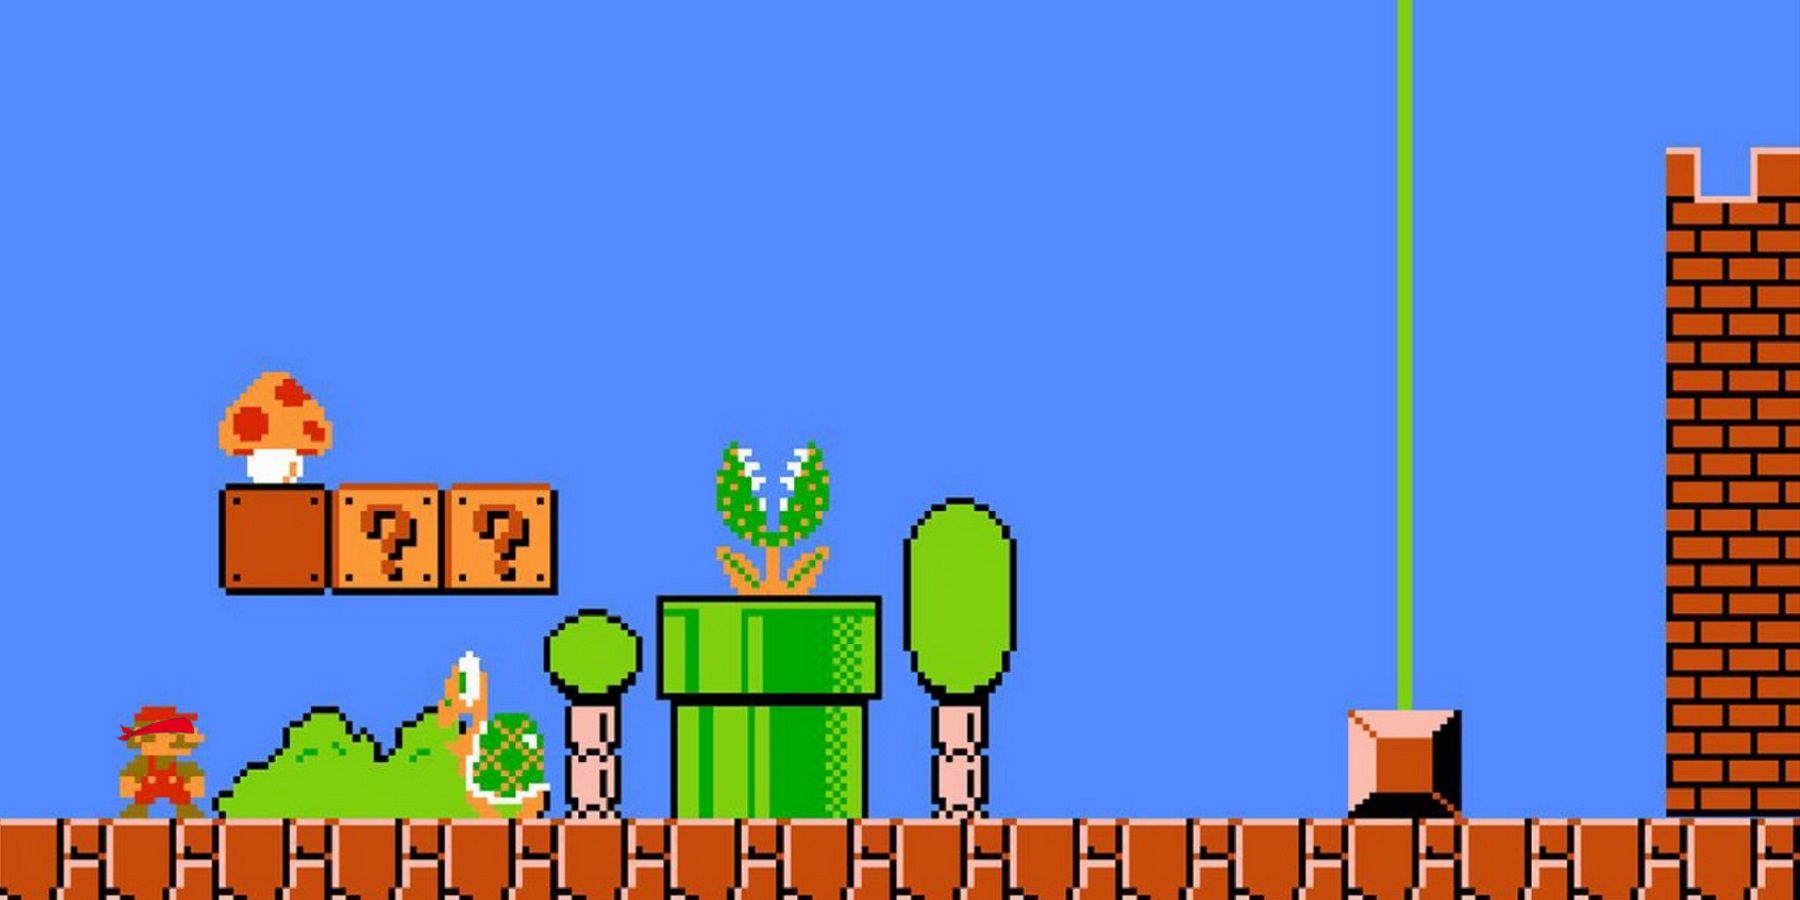 Image from Super Mario Bros showing the titular Mario wearing a small red blindfold.